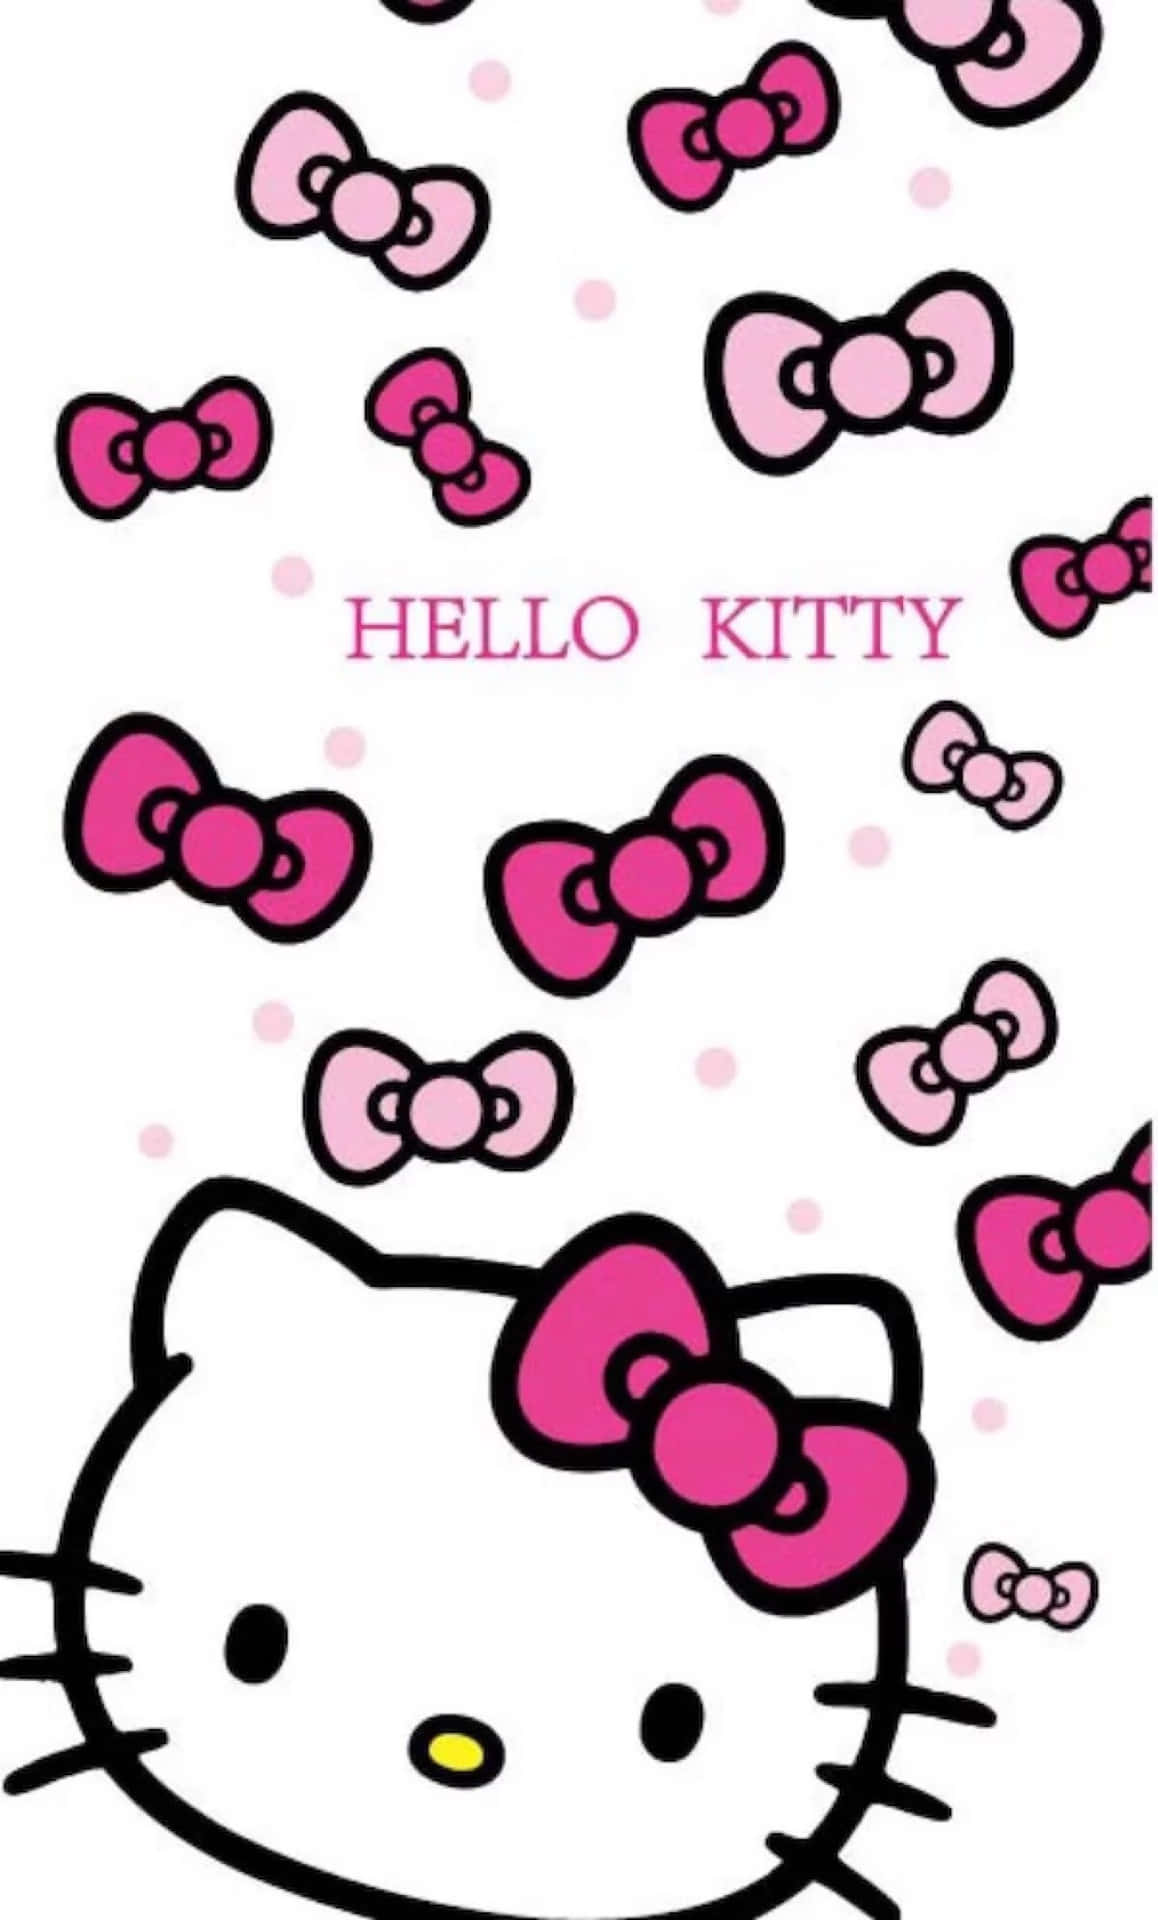 Hello Kitty Pink Bows Background Wallpaper